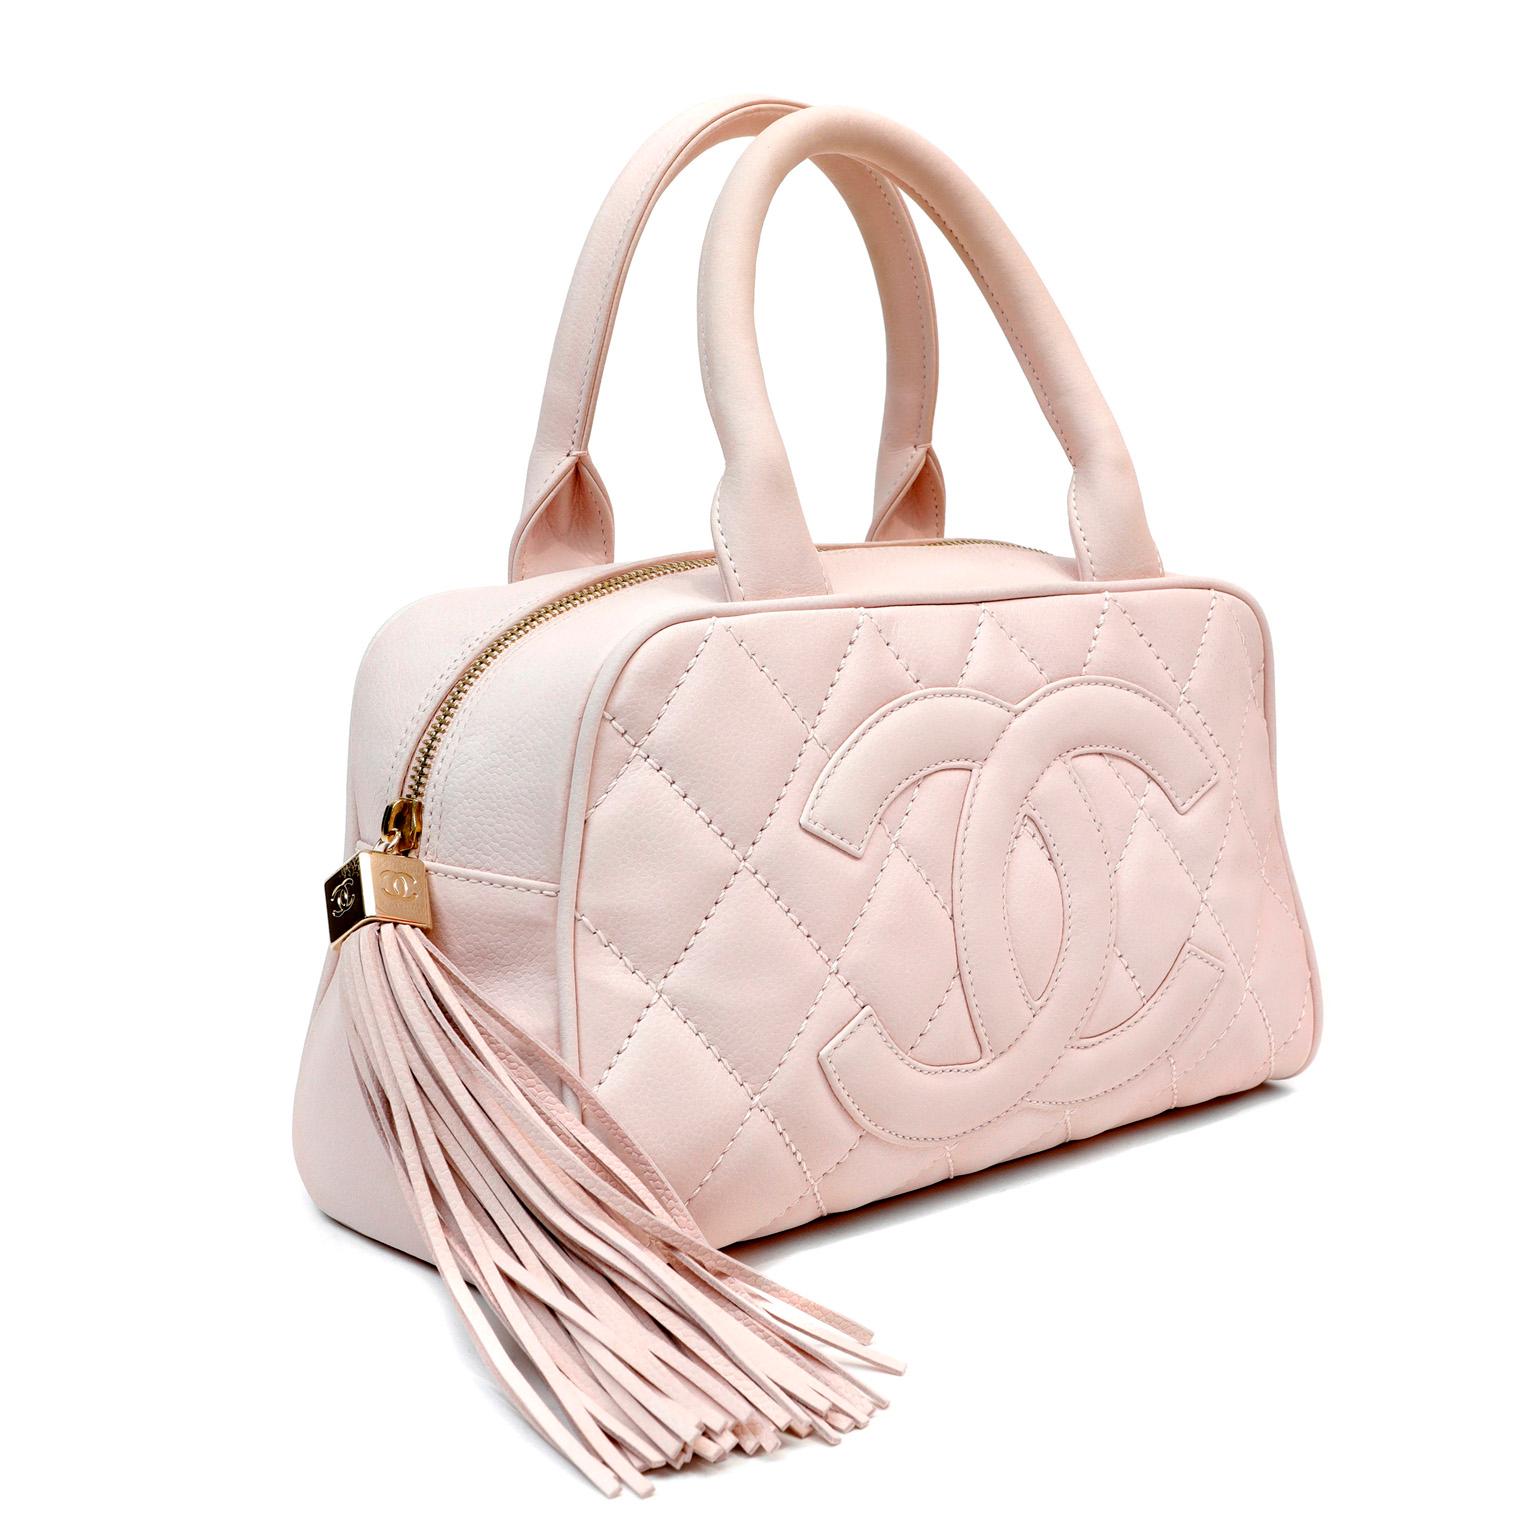 Chanel Pink/White Quilted Perforated Jersey Medium Classic Single Flap Bag